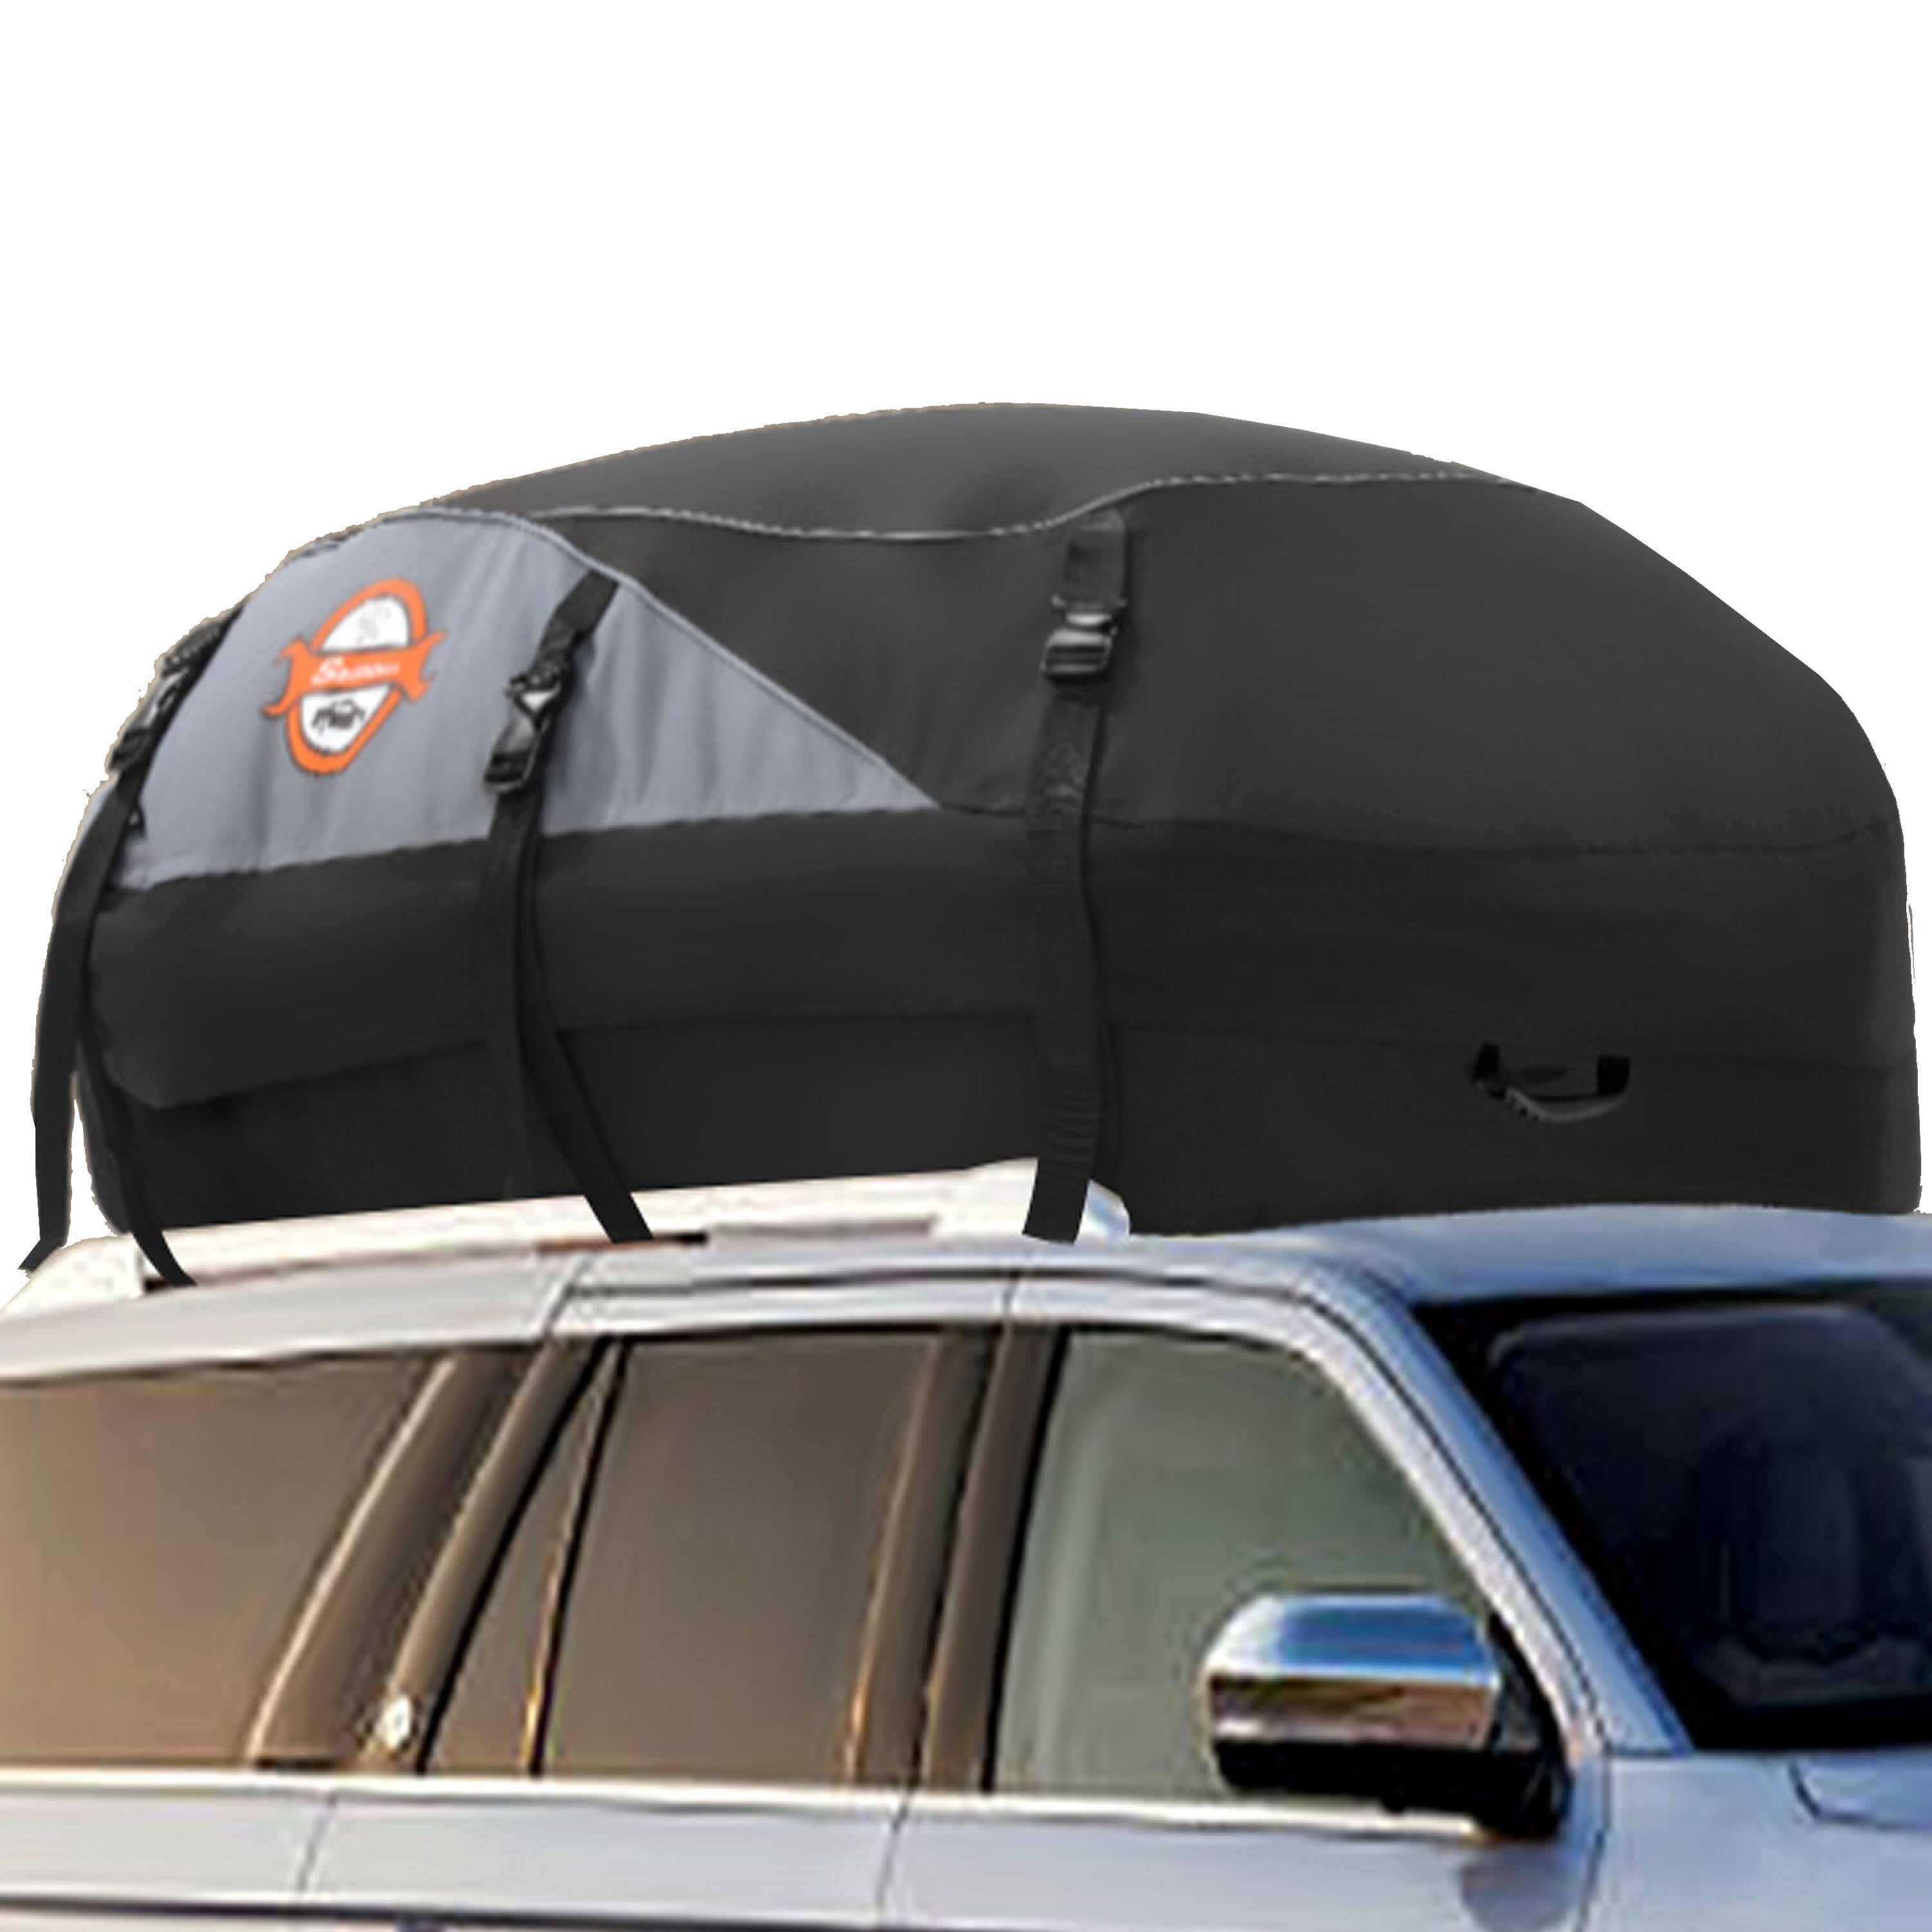 Car Vehicles Waterproof Roof Top Cargo Carrier Luggage Travel